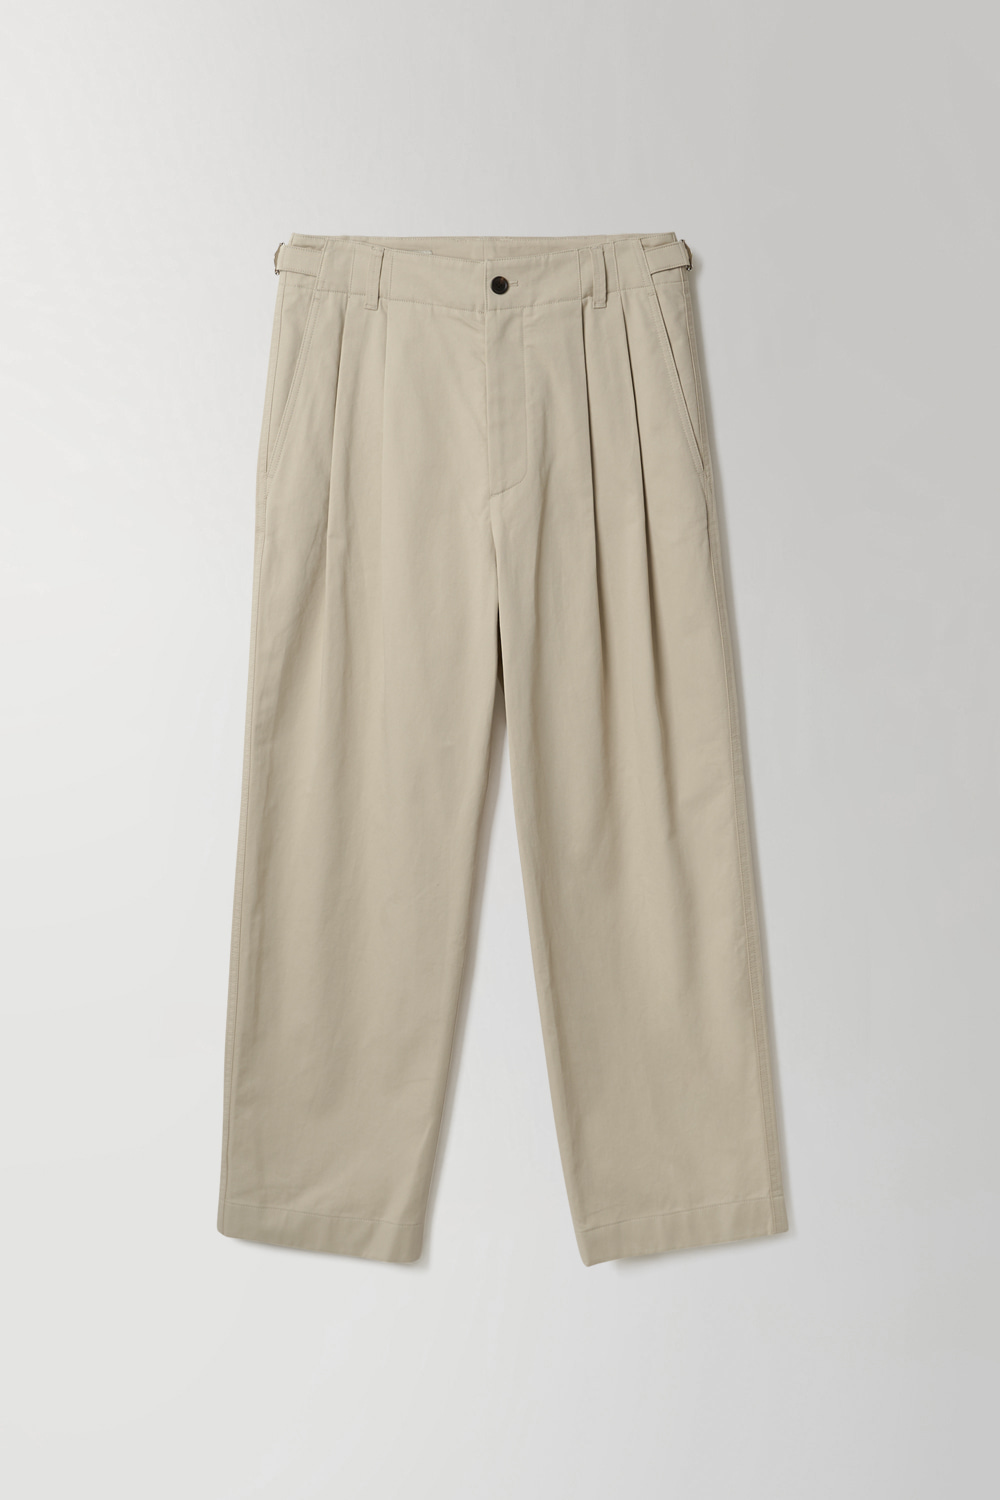 [3RD] TRAVELLER CHINO PANTS (TYPE1) - SAND BEIGE